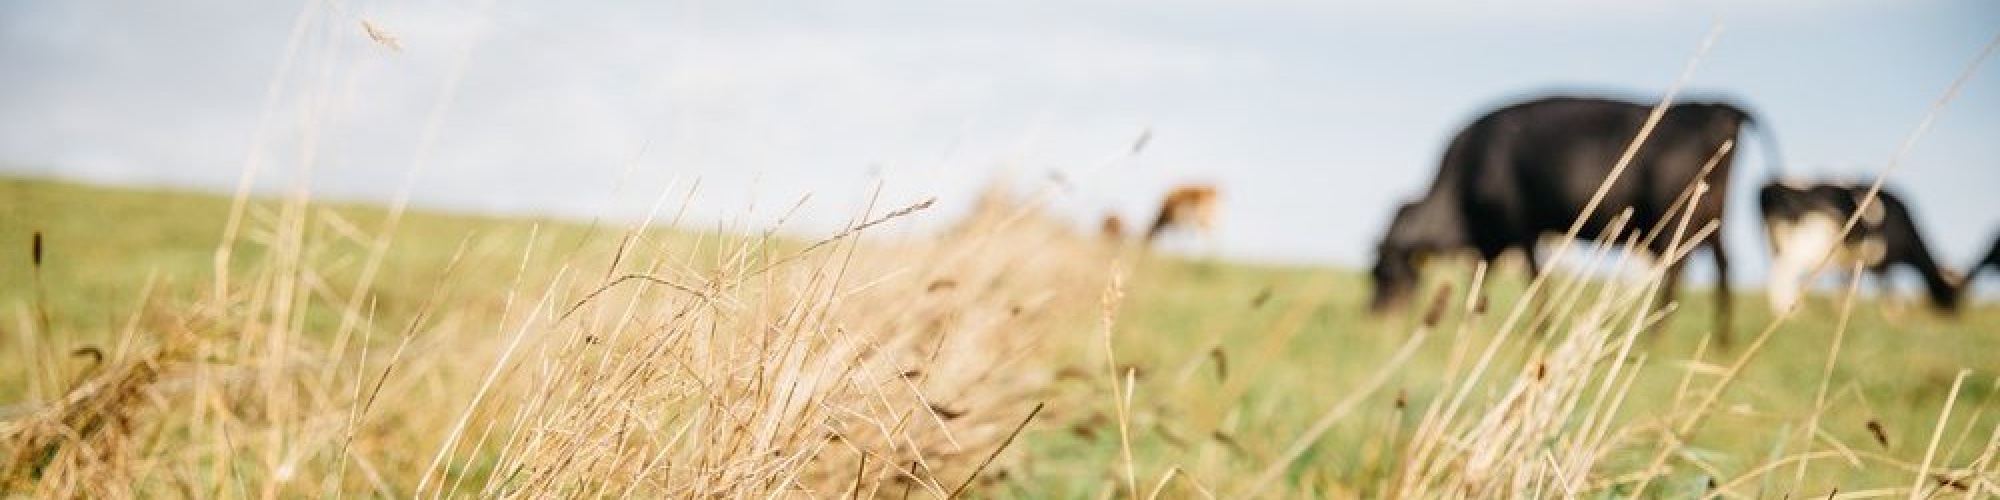 A cow grazes out of focus in the distances with long grasses in the foreground